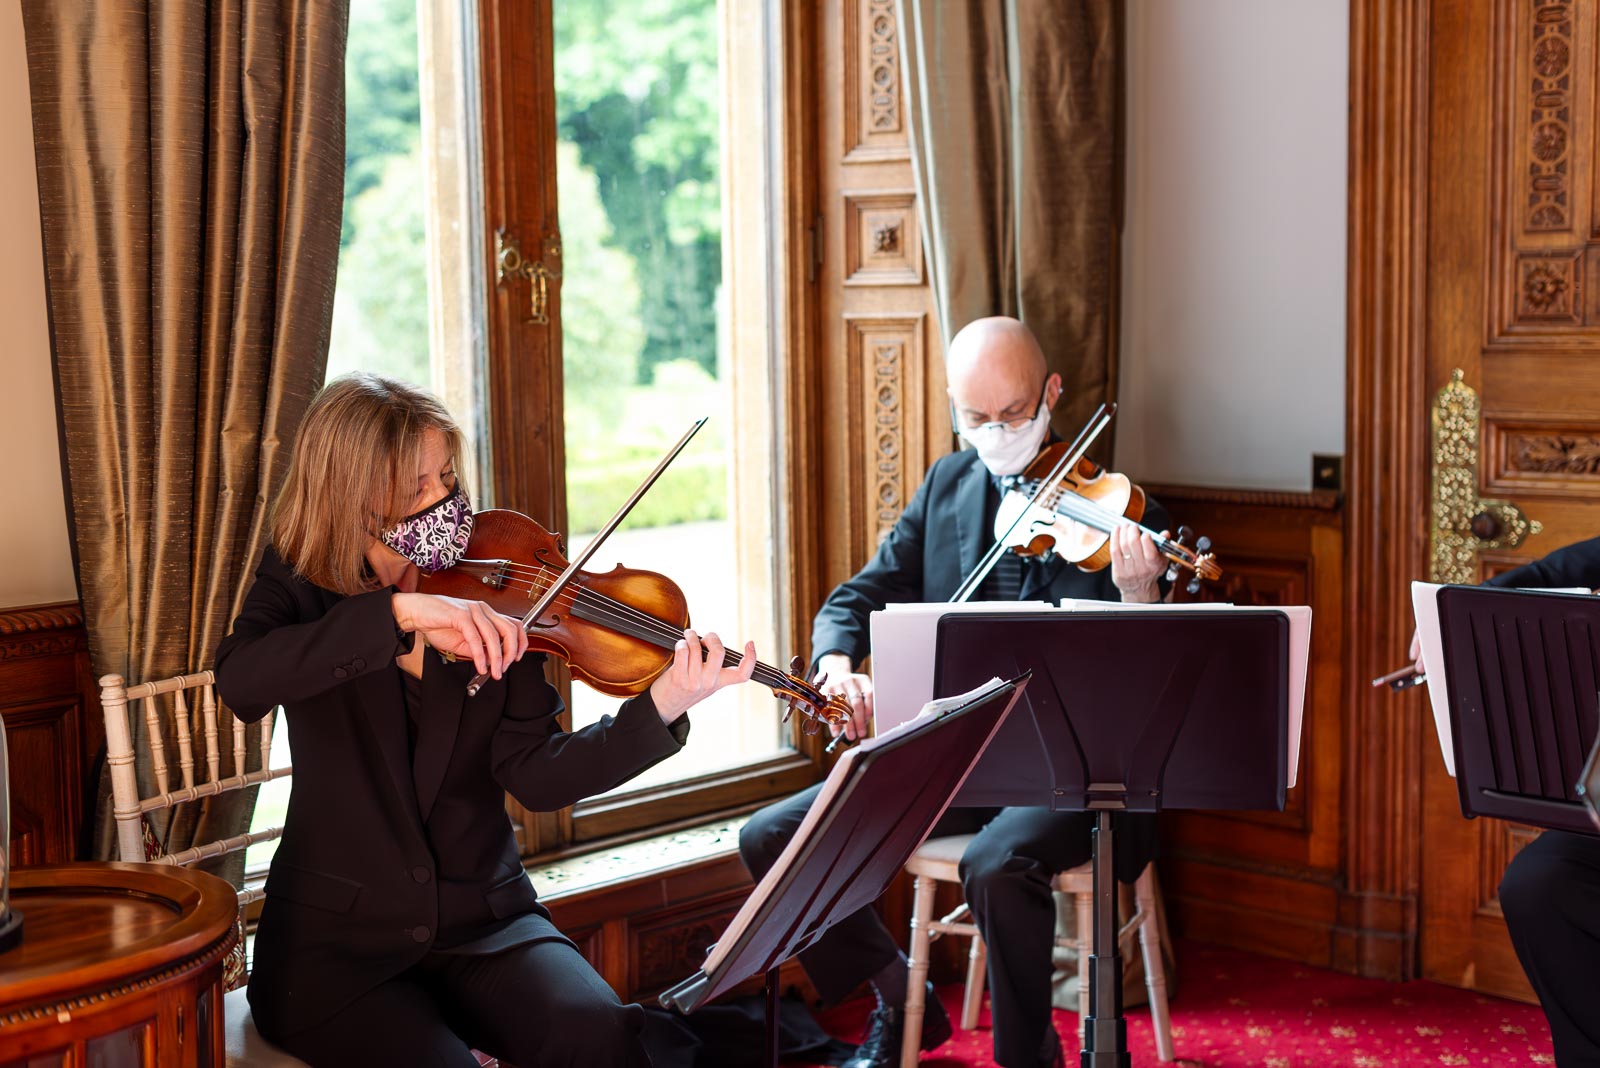 A string quartet play at Carmen and Jeff's wedding in Manor by the Lake in Cheltenham.